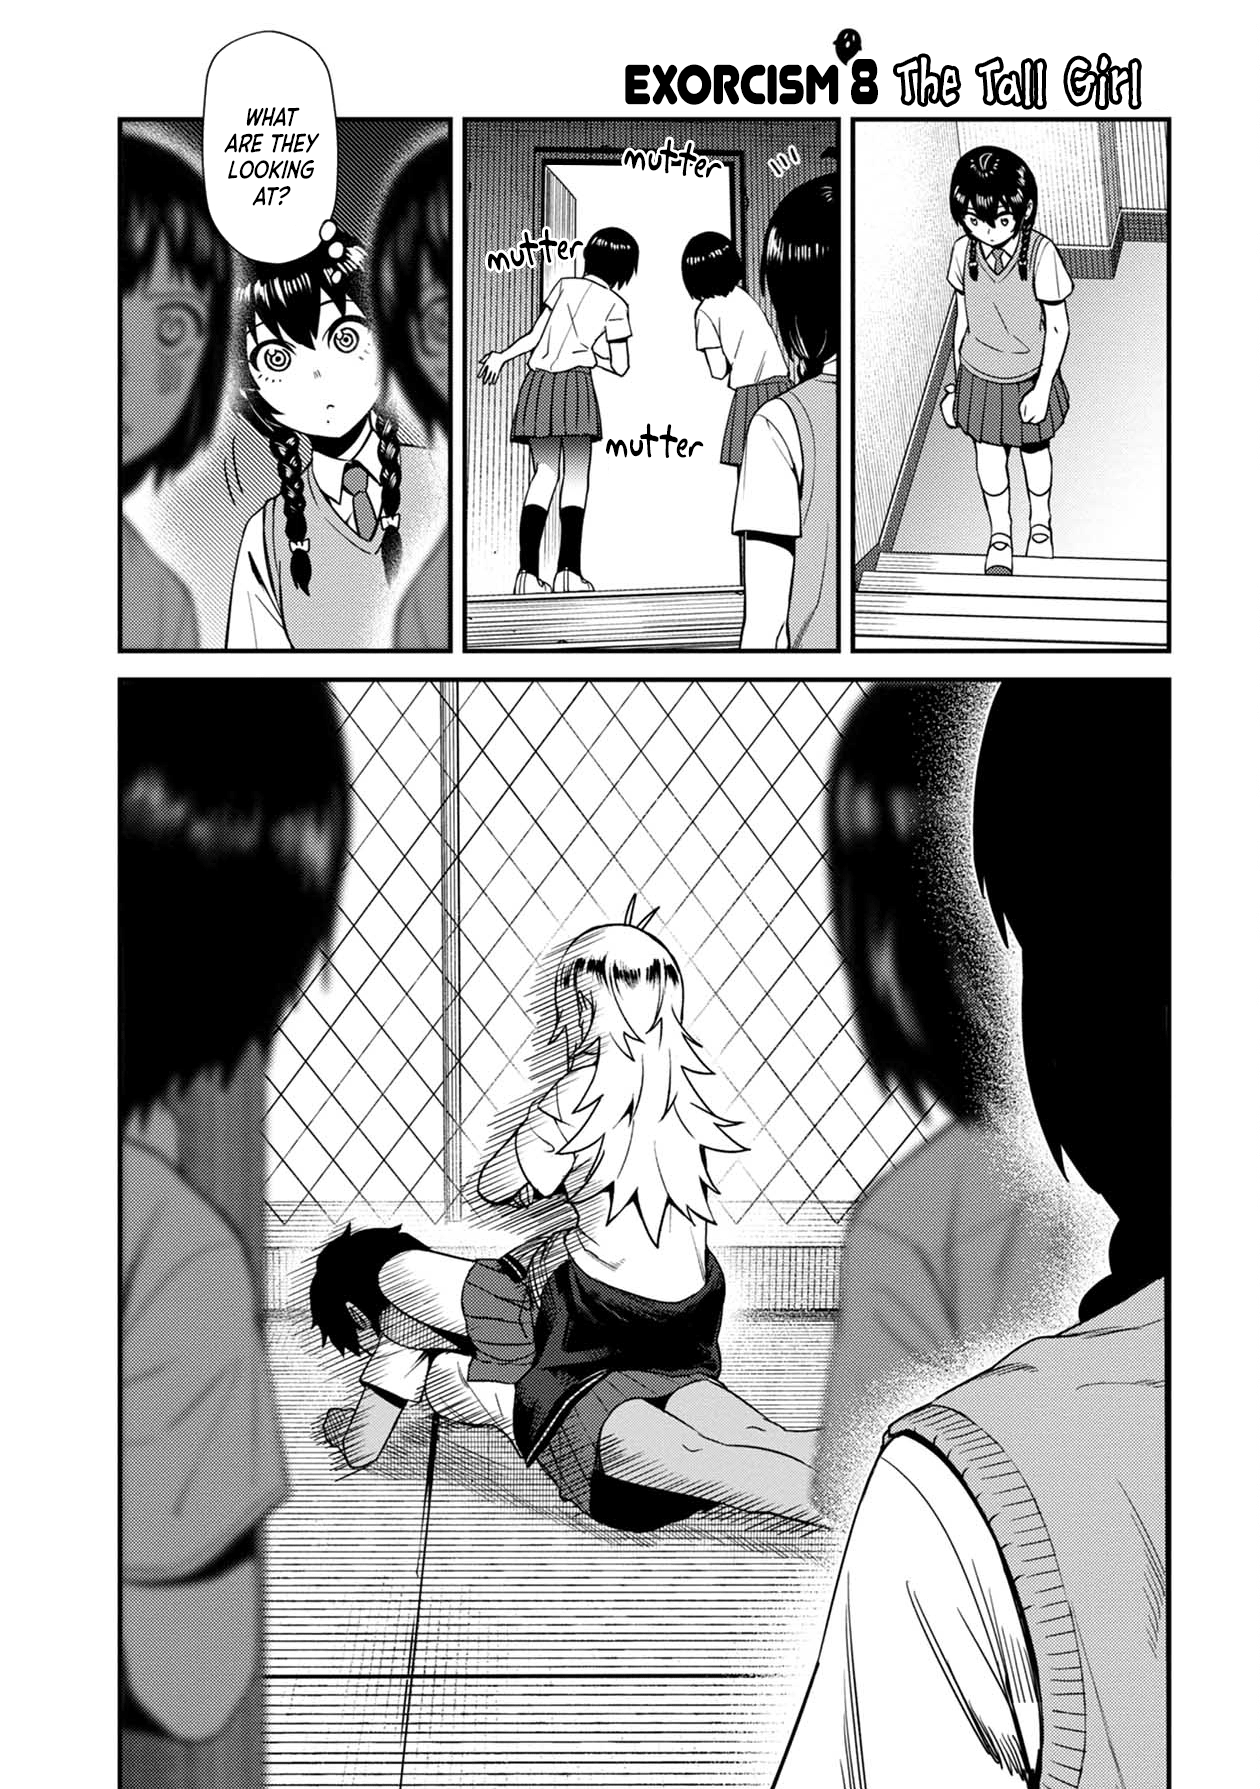 Bad Girl-Exorcist Reina Vol.1 Chapter 8: Exorcism #8 - The Tall Girl - Picture 1